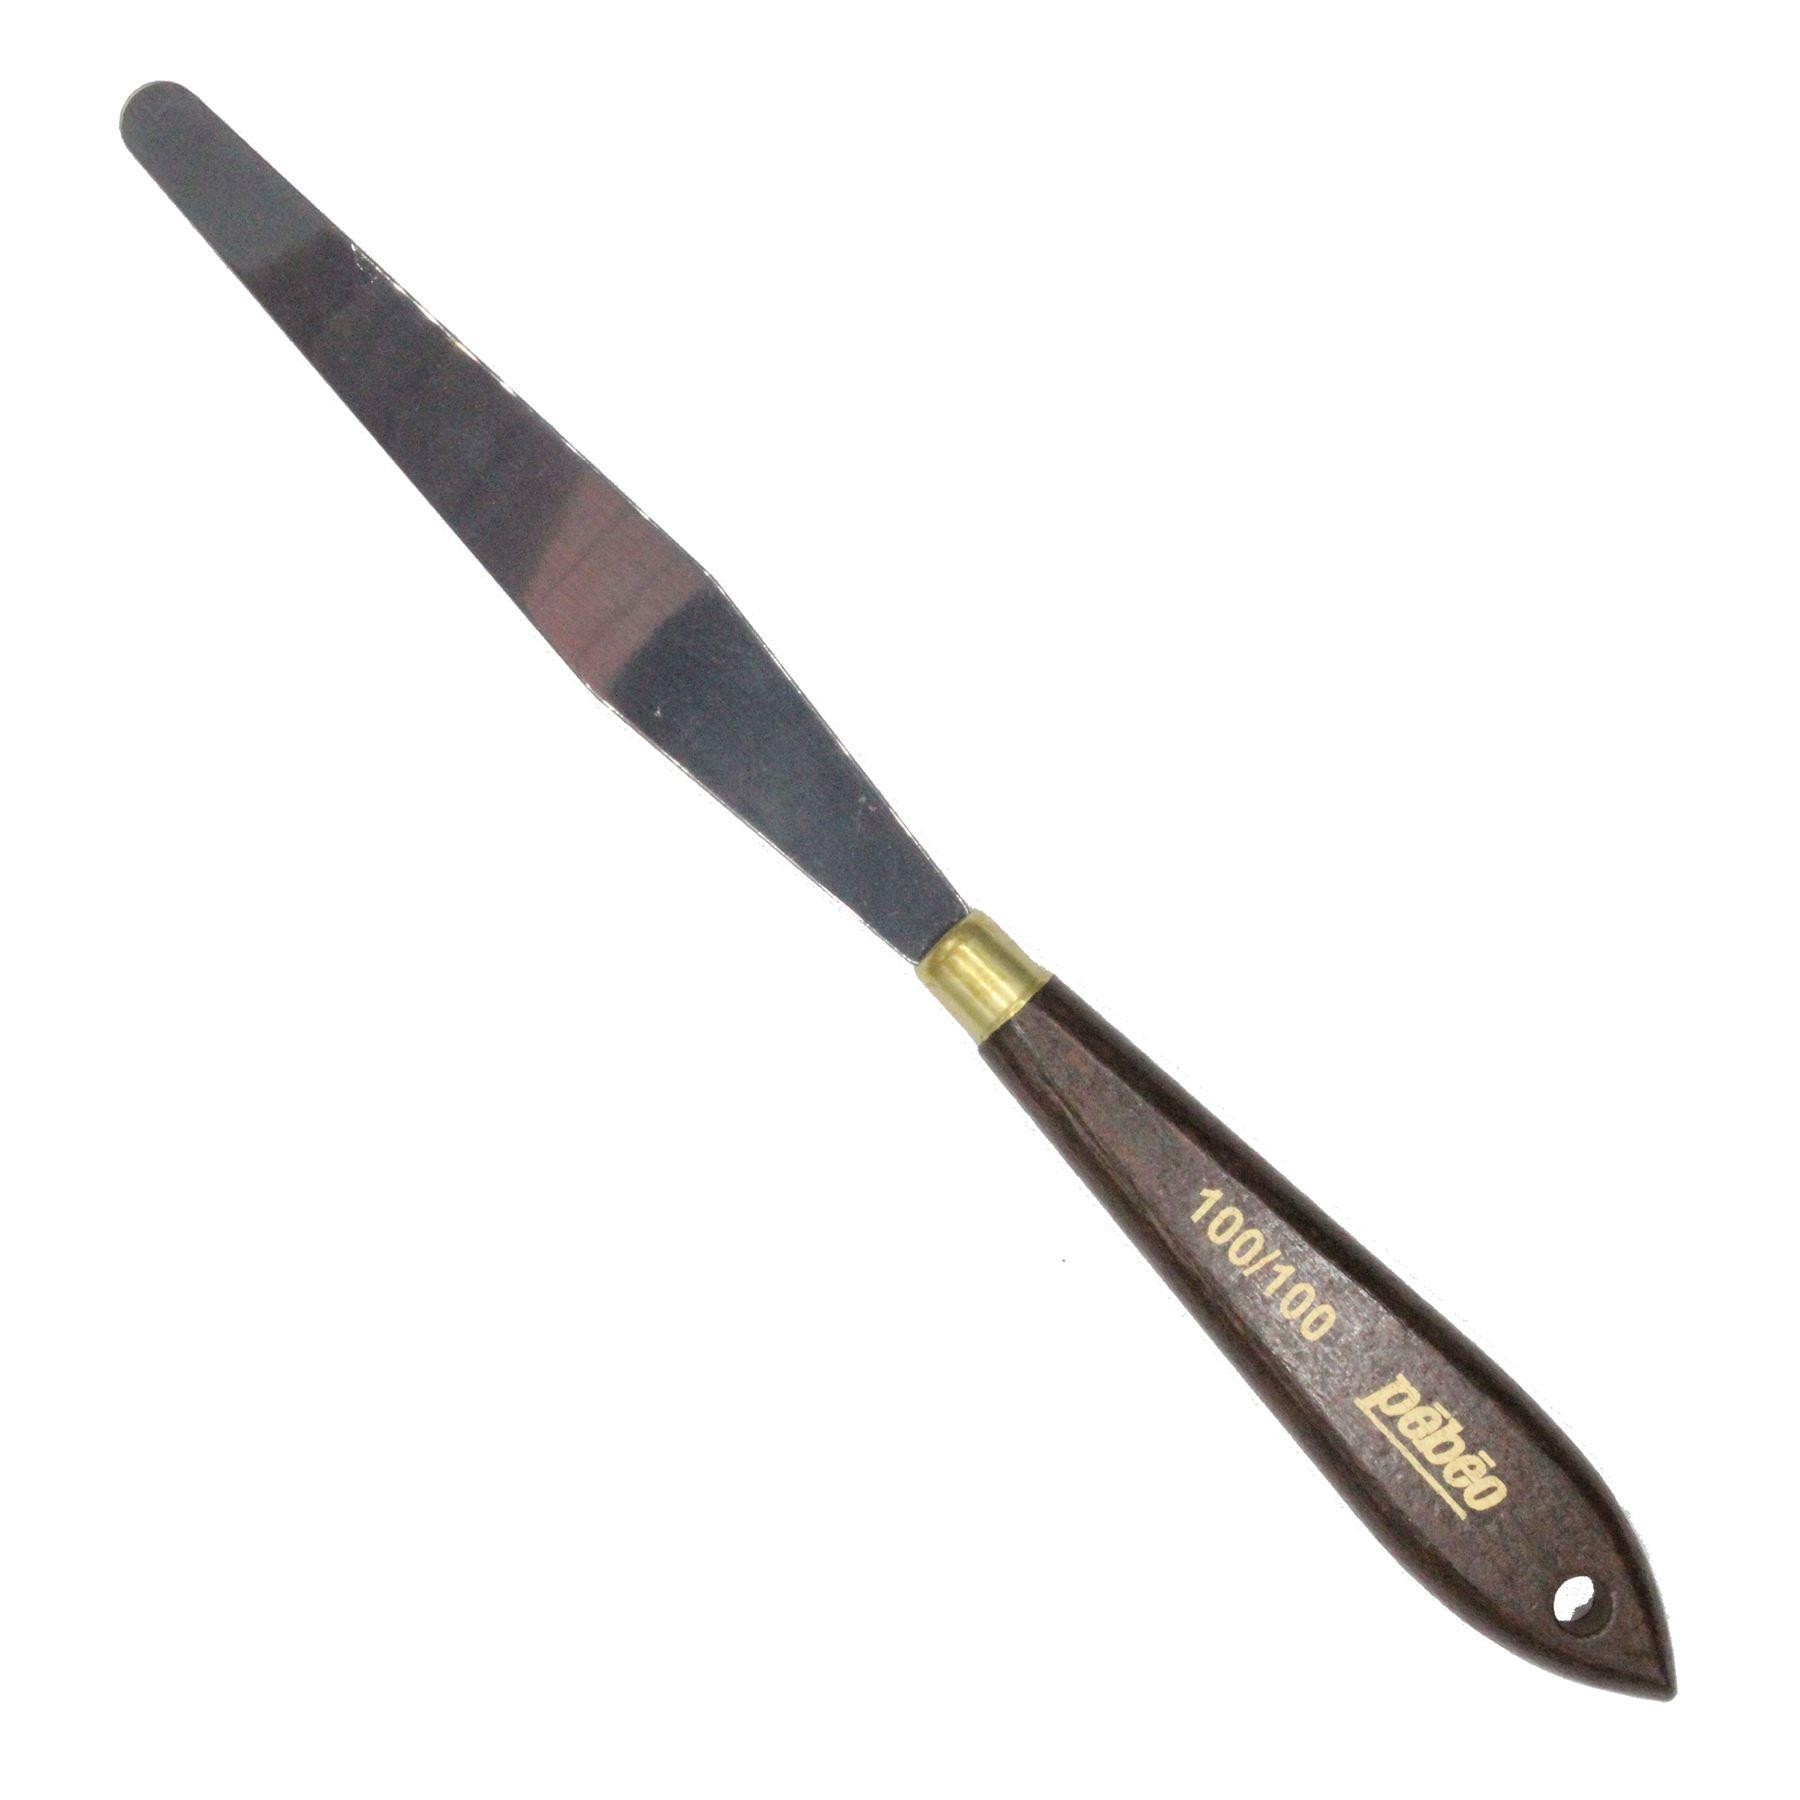 Pebeo painting knife / knive 100-100